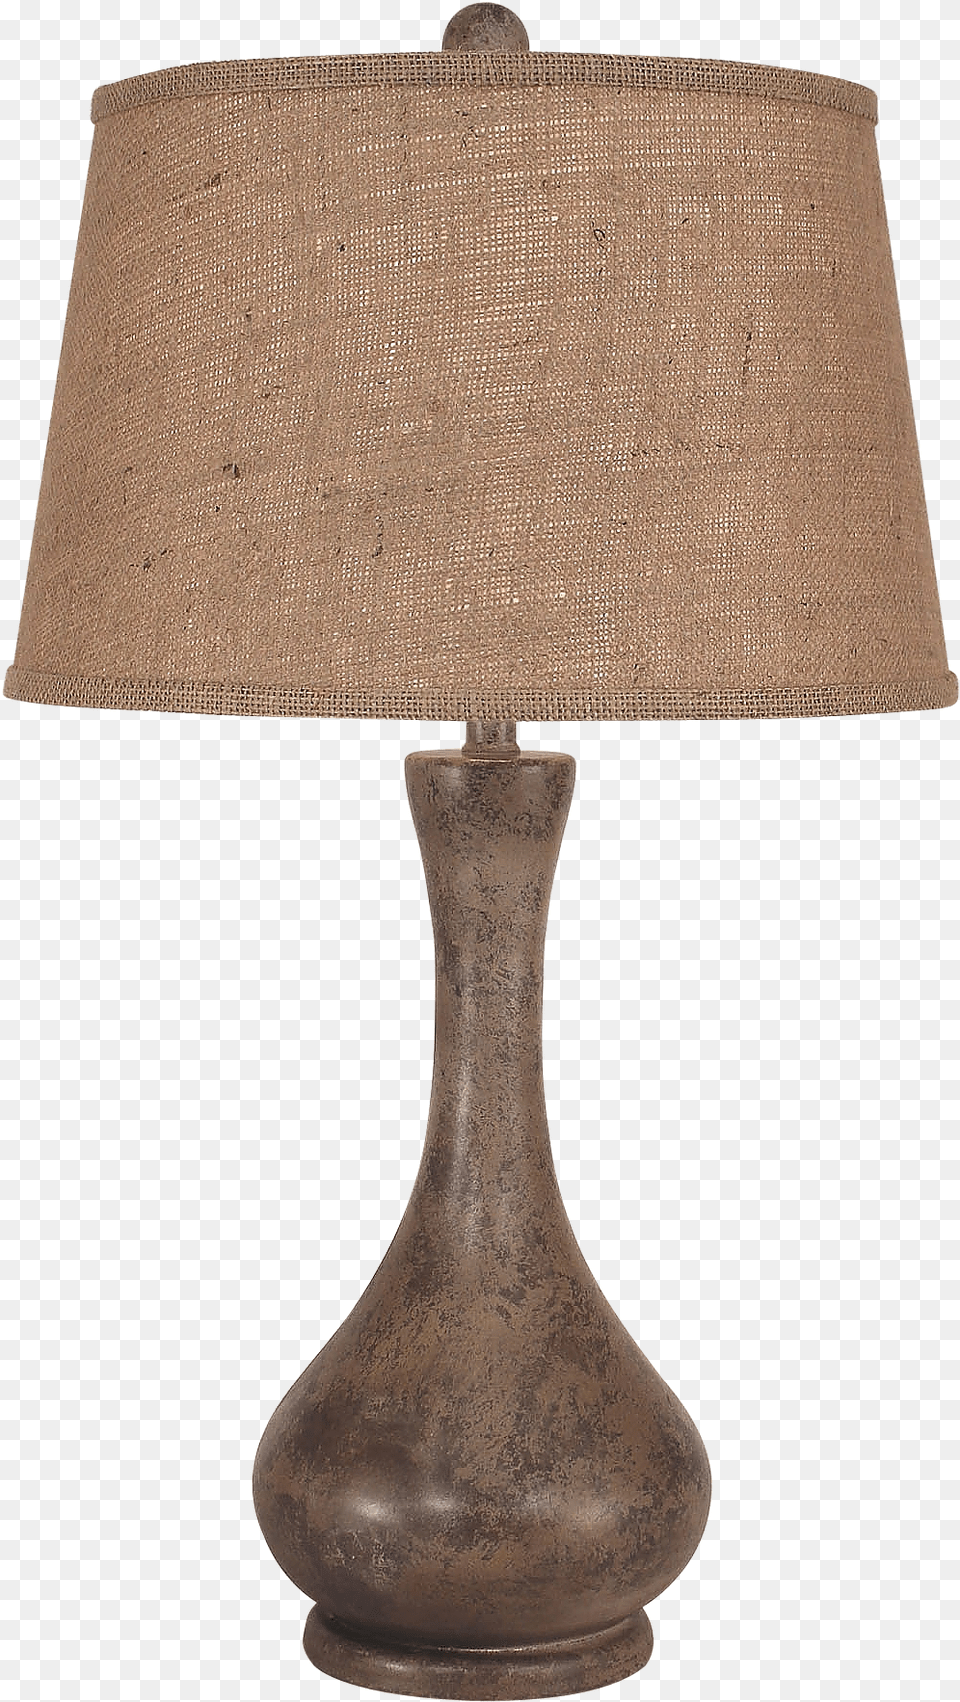 Tarnished Cottage Smooth Genie Bottle Table Lamp Lamp, Table Lamp, Lampshade Free Png